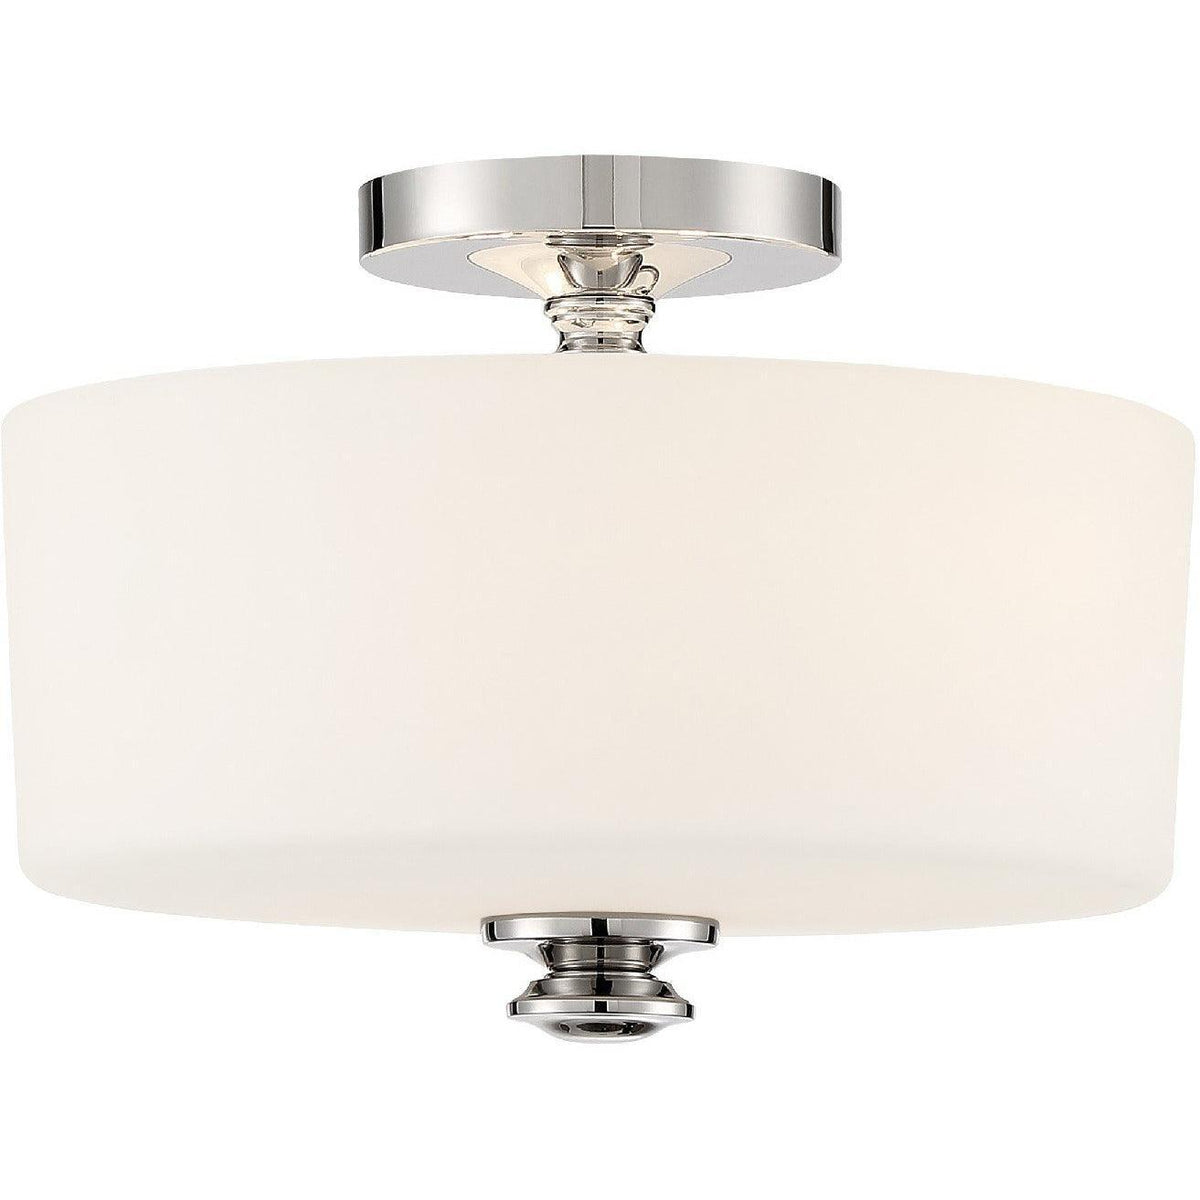 Crystorama - Travis Two Light Ceiling Mount - TRA-A3302-PN | Montreal Lighting & Hardware